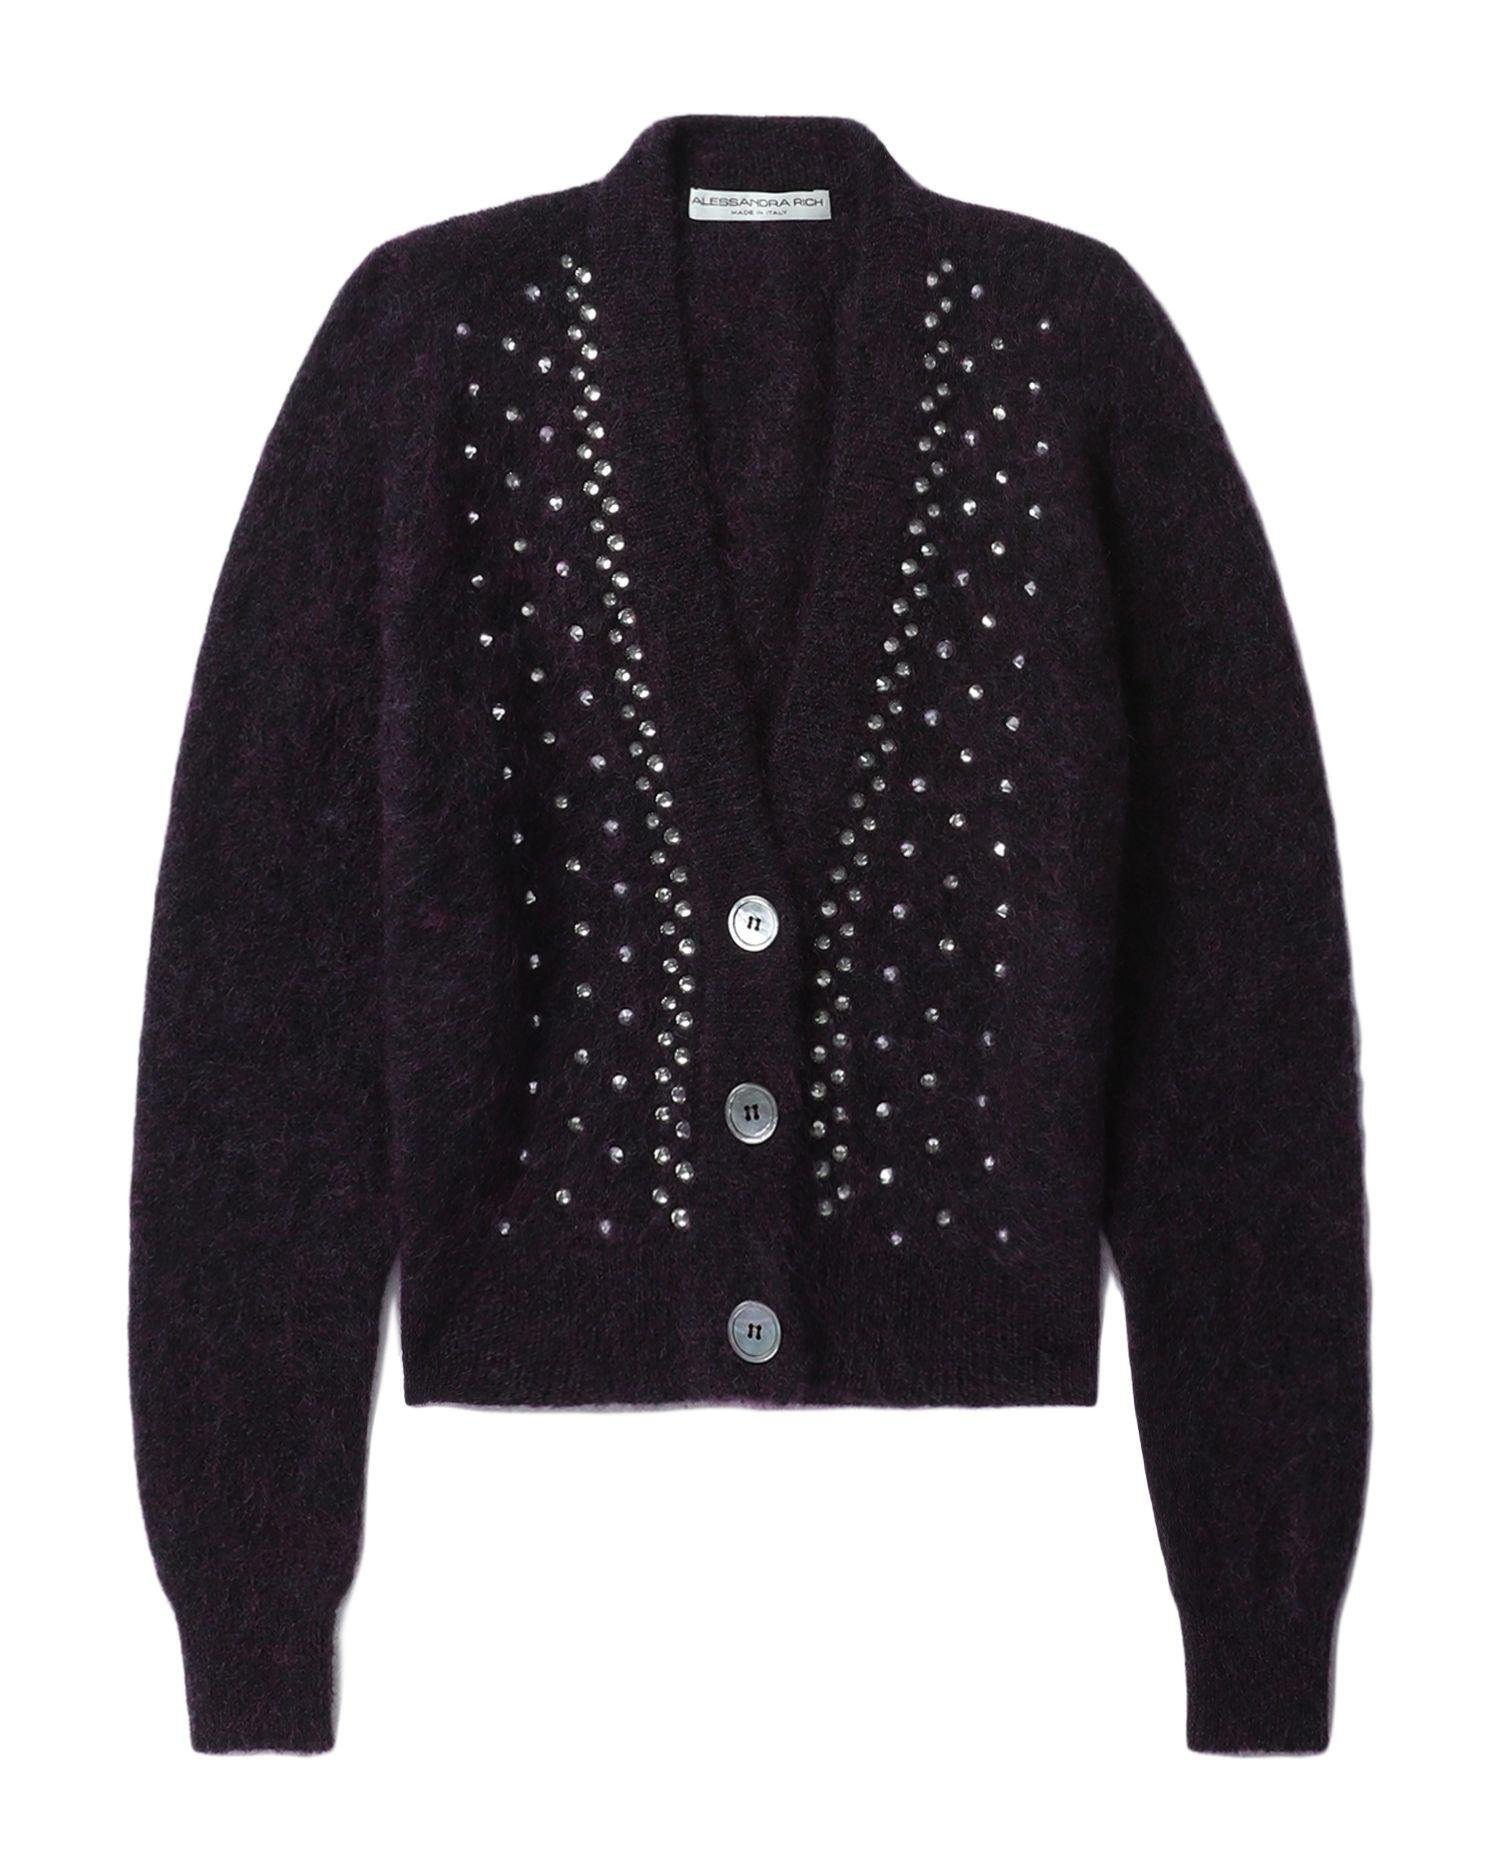 Crystal-embellished long cardigan by ALESSANDRA RICH